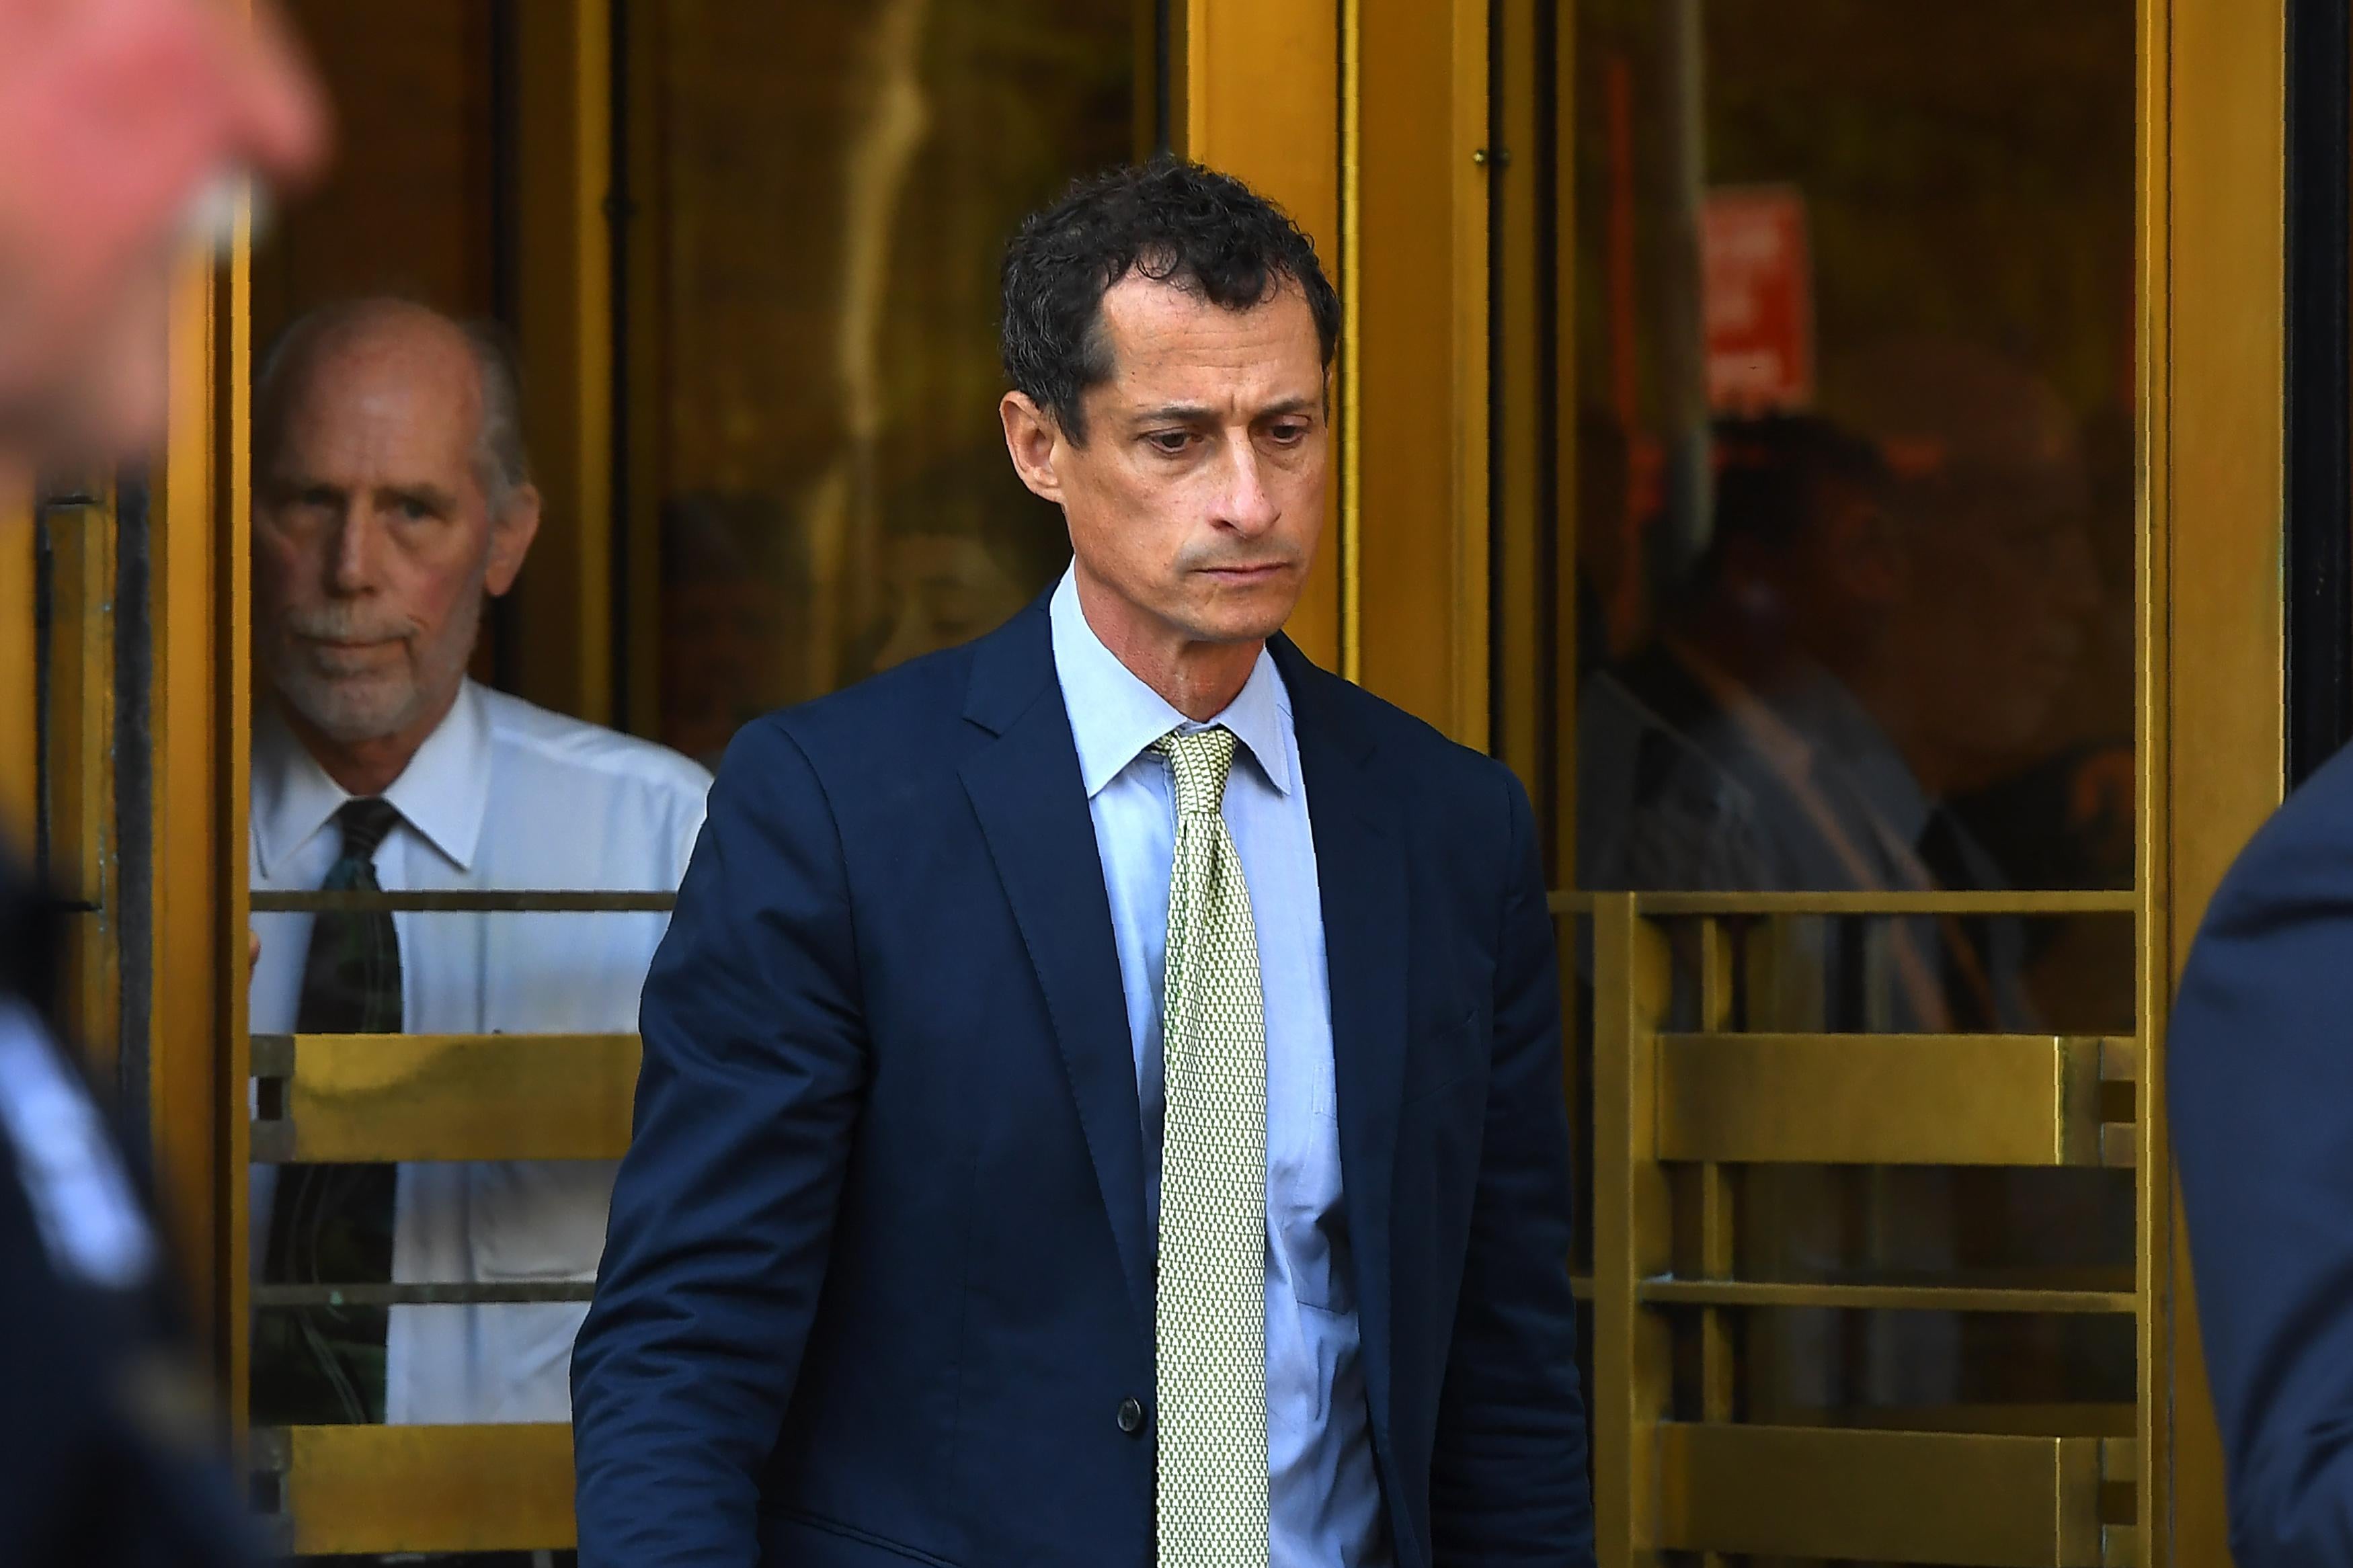 Anthony Weiner, a former Democratic congressman leaves Federal Court in New York September 25, 2017 after being sentenced for 21-months  for sexting with a 15-year-old girl. / AFP PHOTO / TIMOTHY A. CLARY        (Photo credit should read TIMOTHY A. CLARY/AFP/Getty Images)